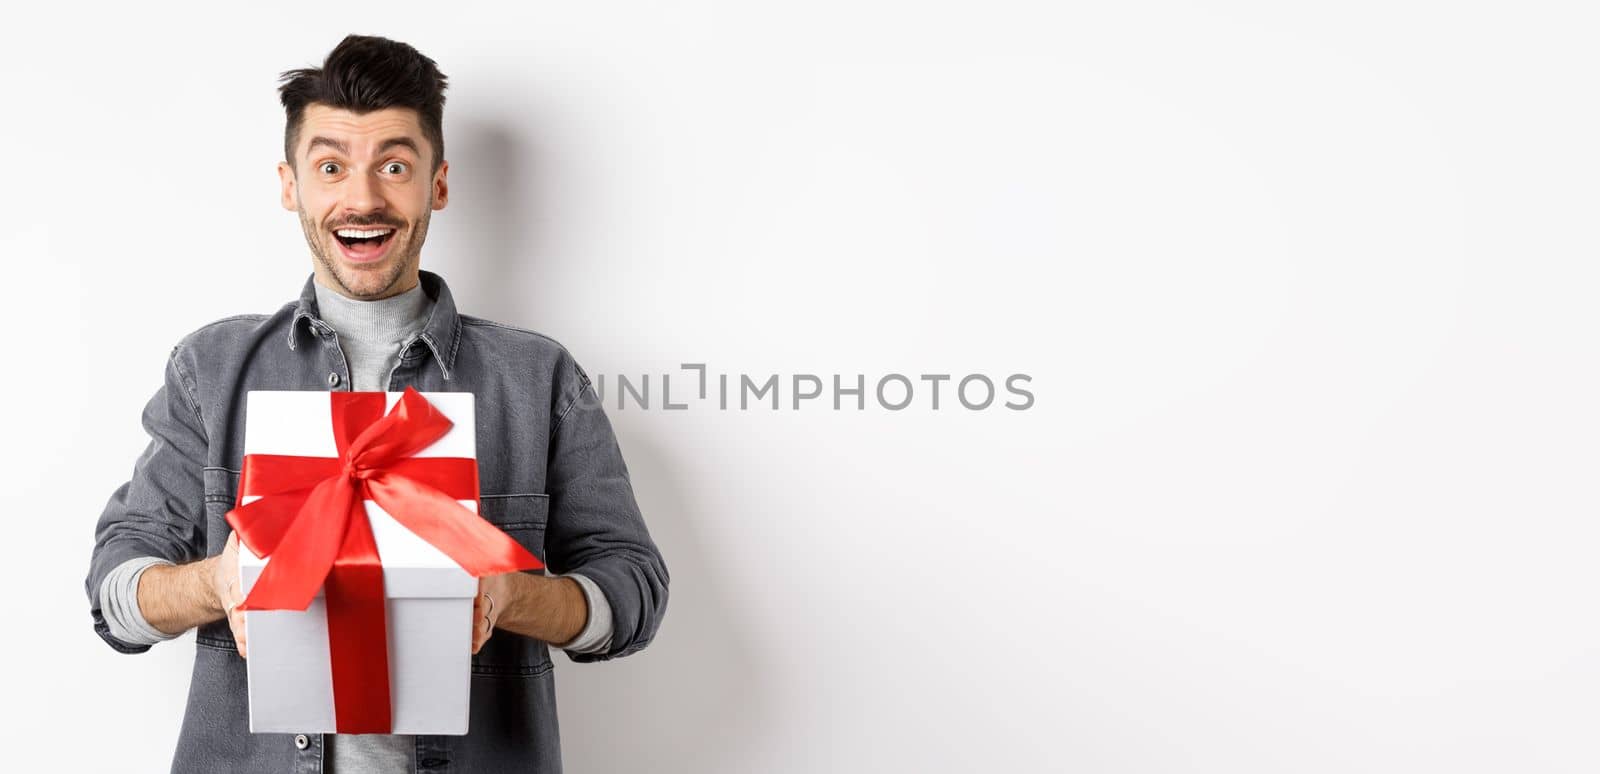 Surprised young man smiling excited, holding big gift box on valentines day holiday, receive surprise present, standing amazed on white background.